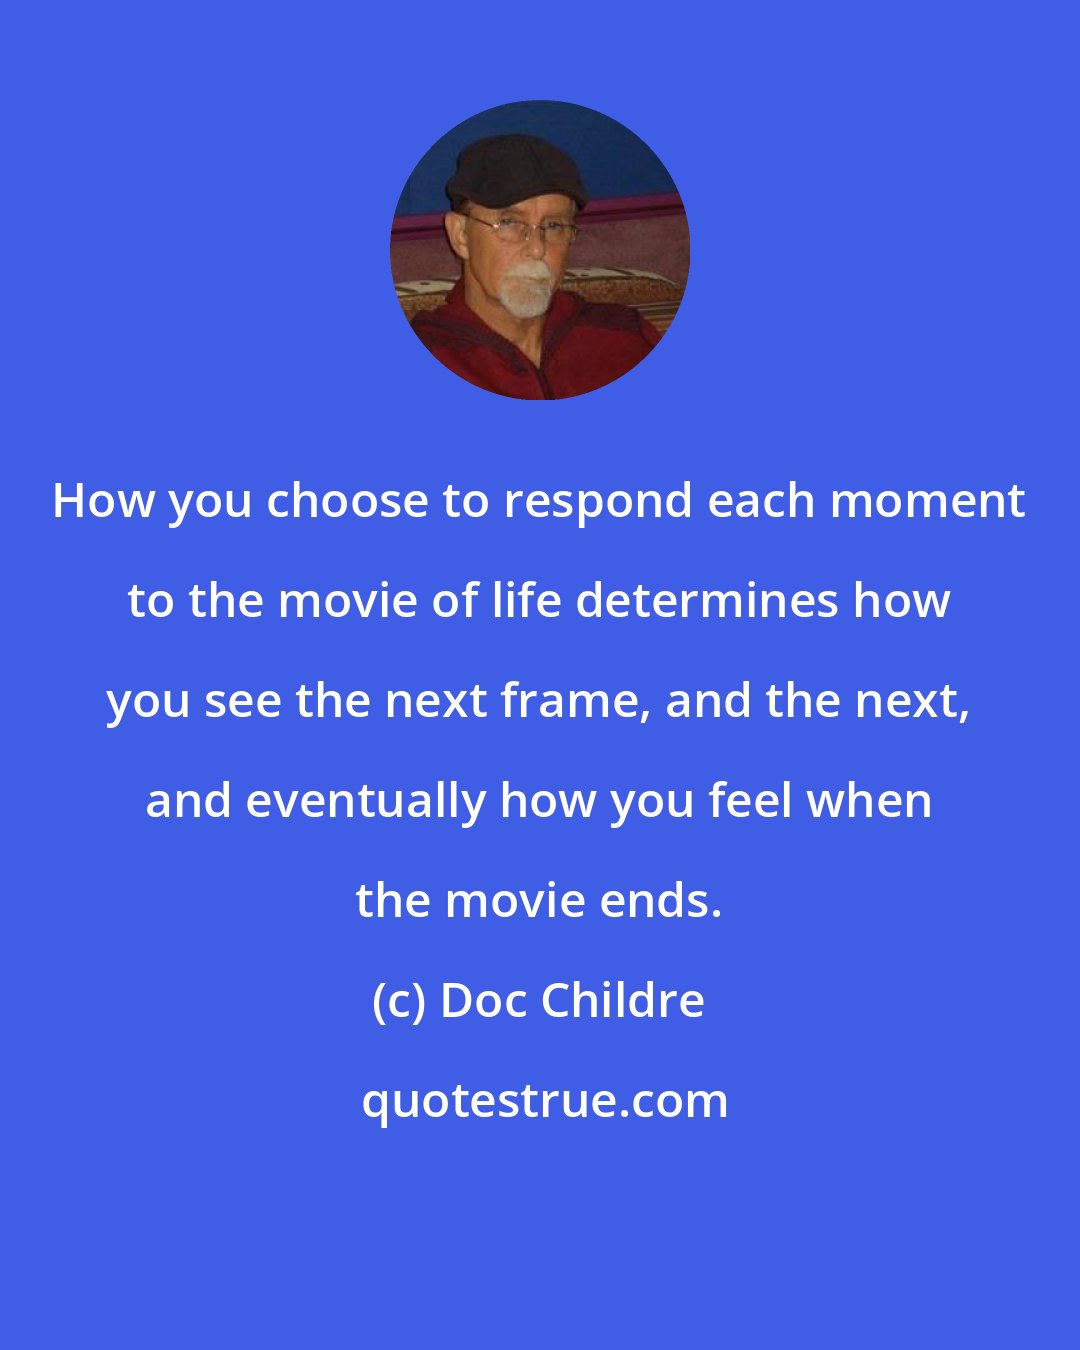 Doc Childre: How you choose to respond each moment to the movie of life determines how you see the next frame, and the next, and eventually how you feel when the movie ends.